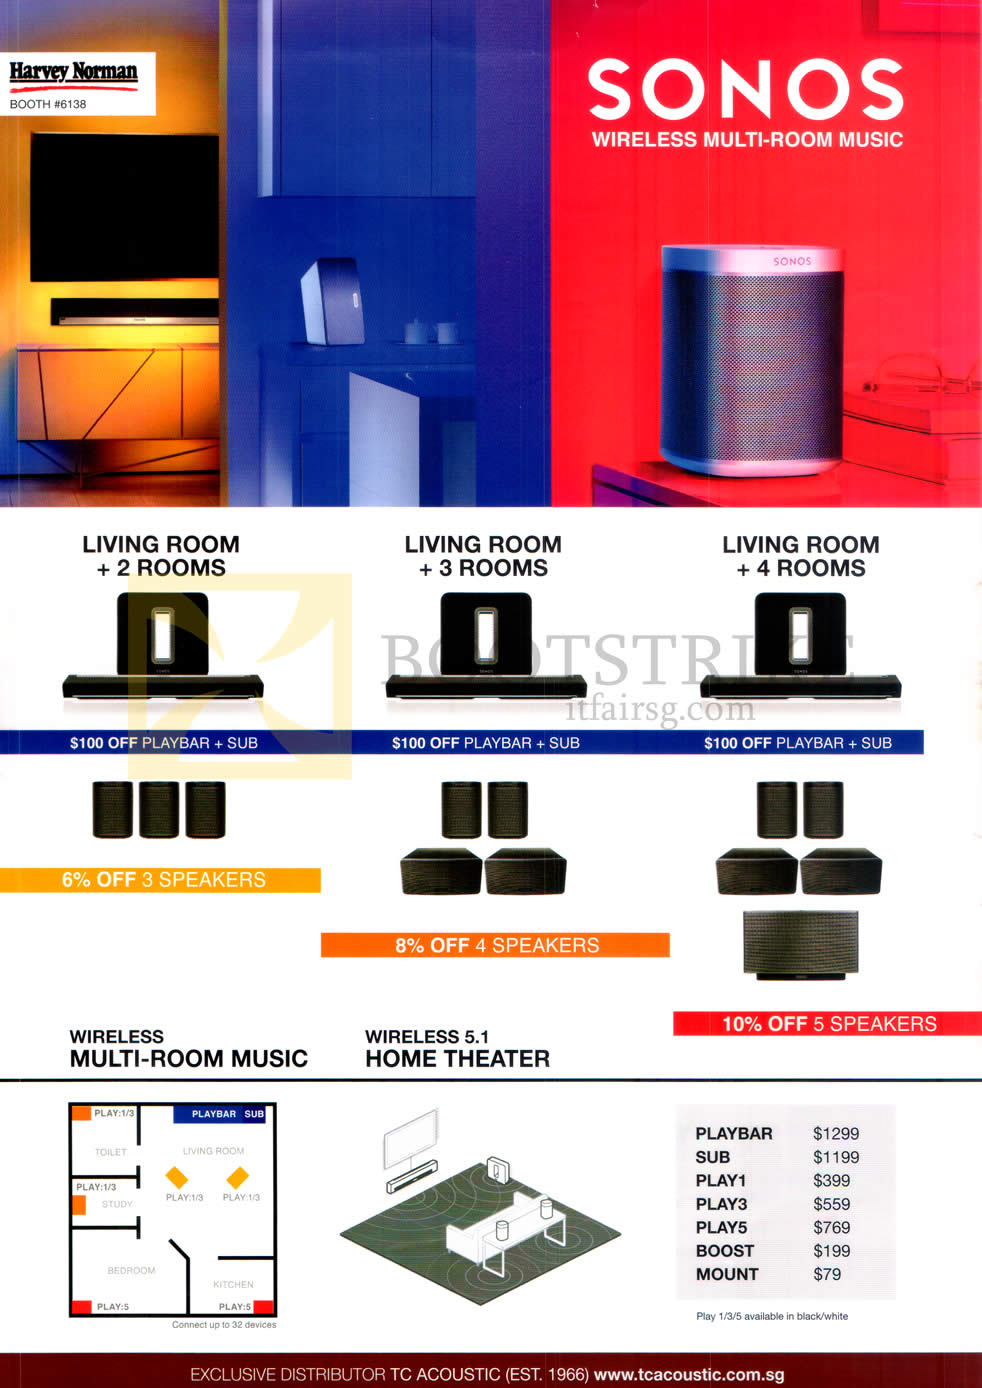 COMEX 2015 price list image brochure of Harvey Norman Sonos Home Theatre Systems 3.1, Play 3, Wireless Multi-Room Music, Wireless 5.1 Home Theatre